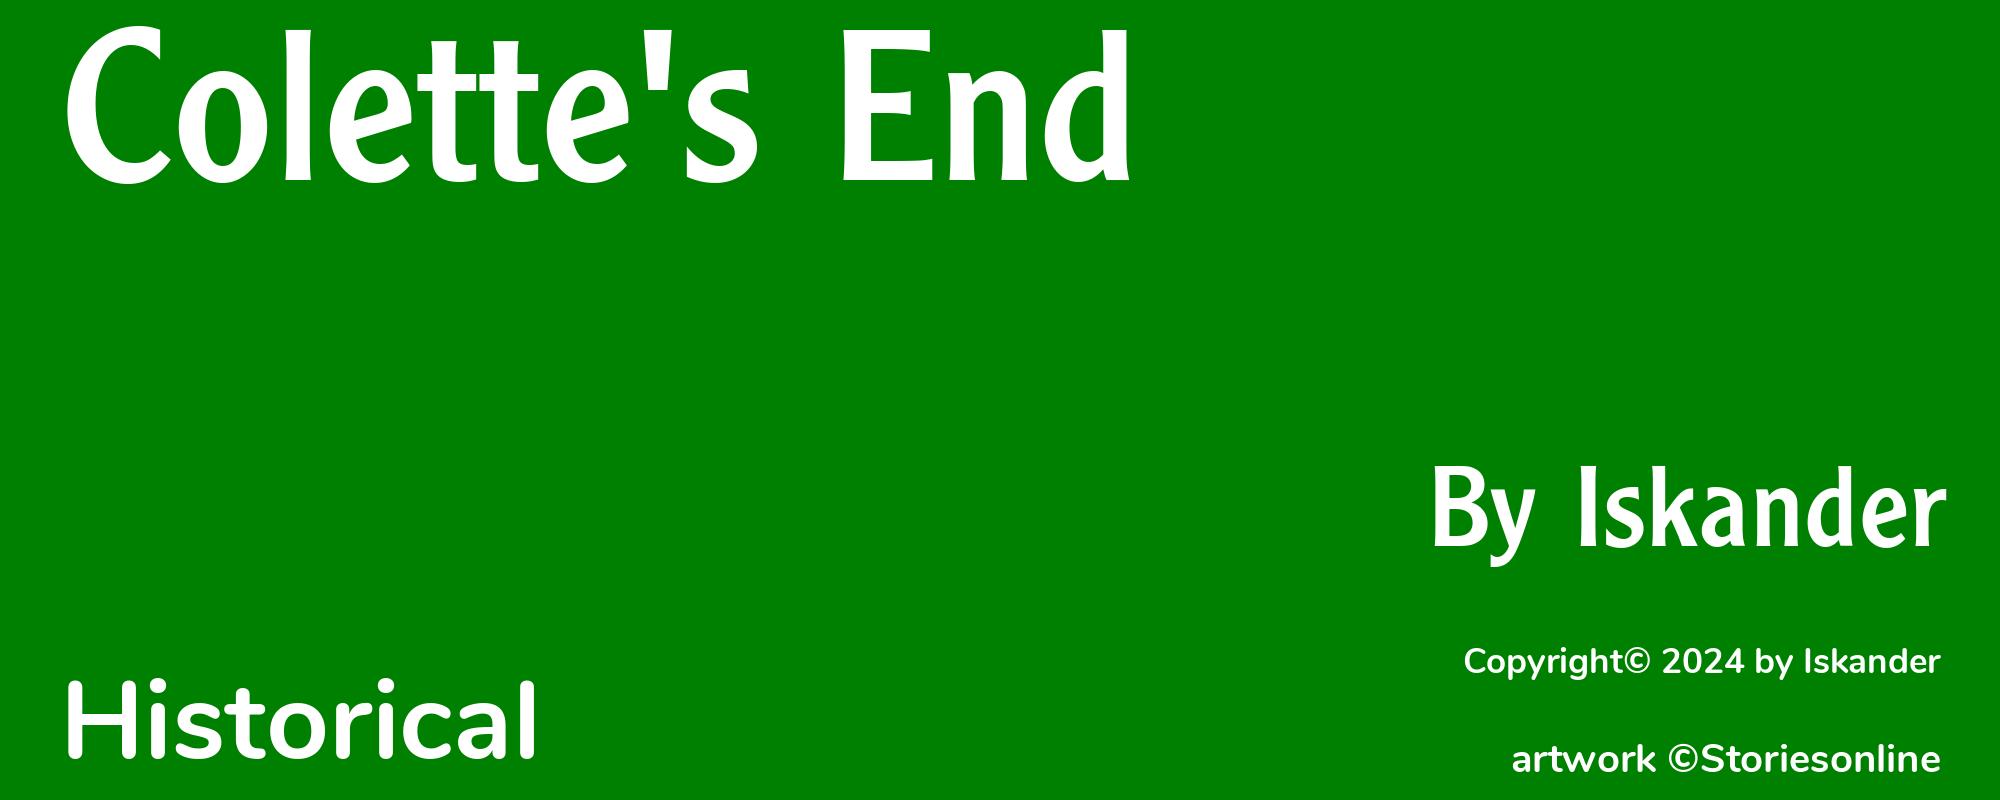 Colette's End - Cover